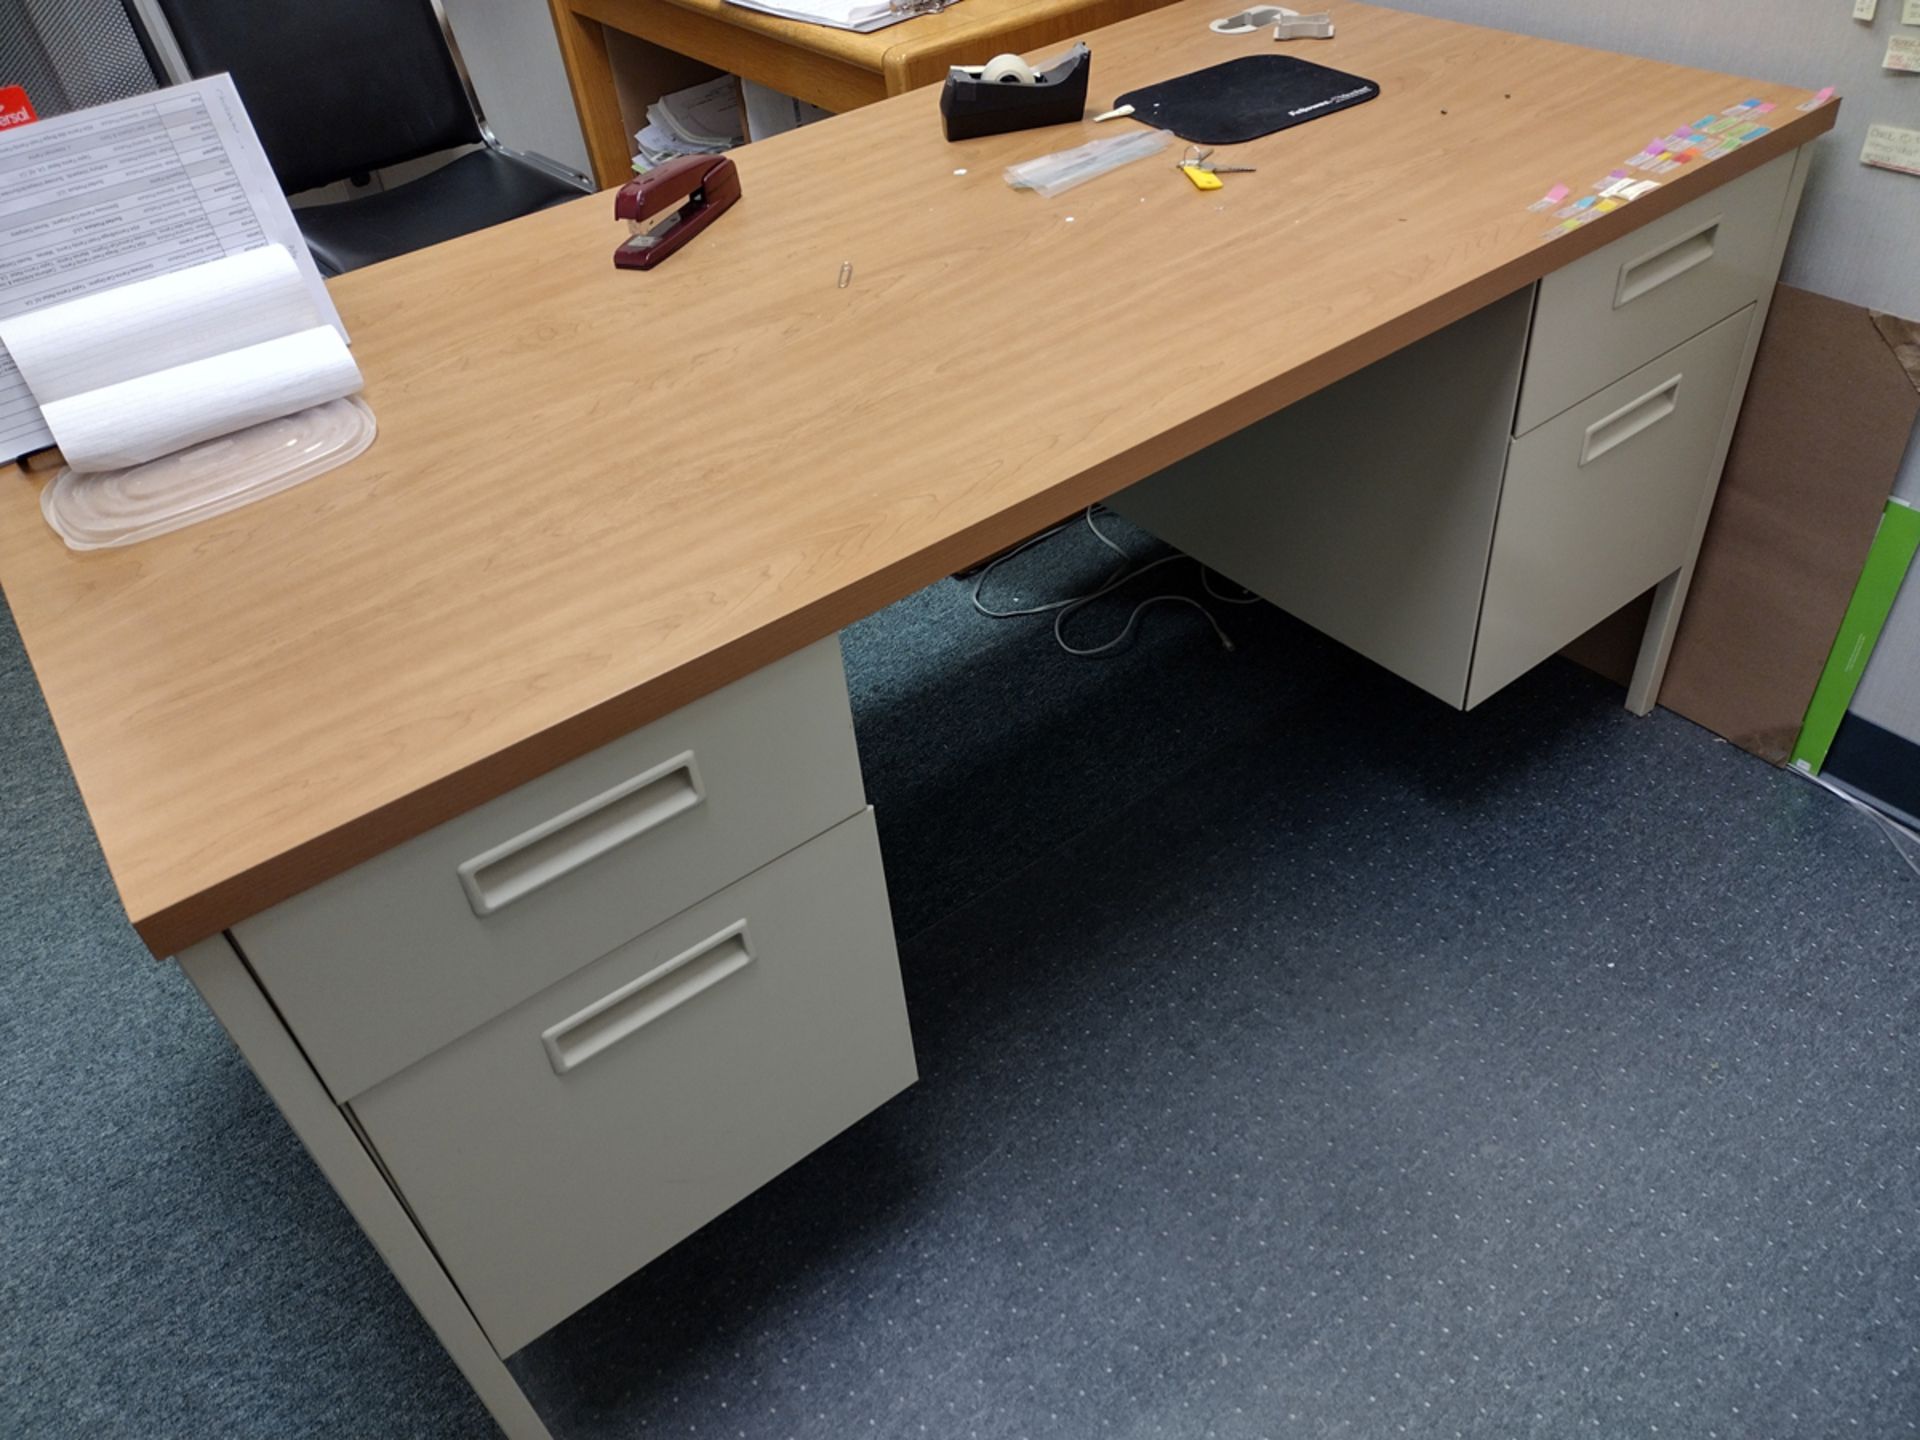 Group of Office Furniture Throughout Rooms - Image 14 of 17